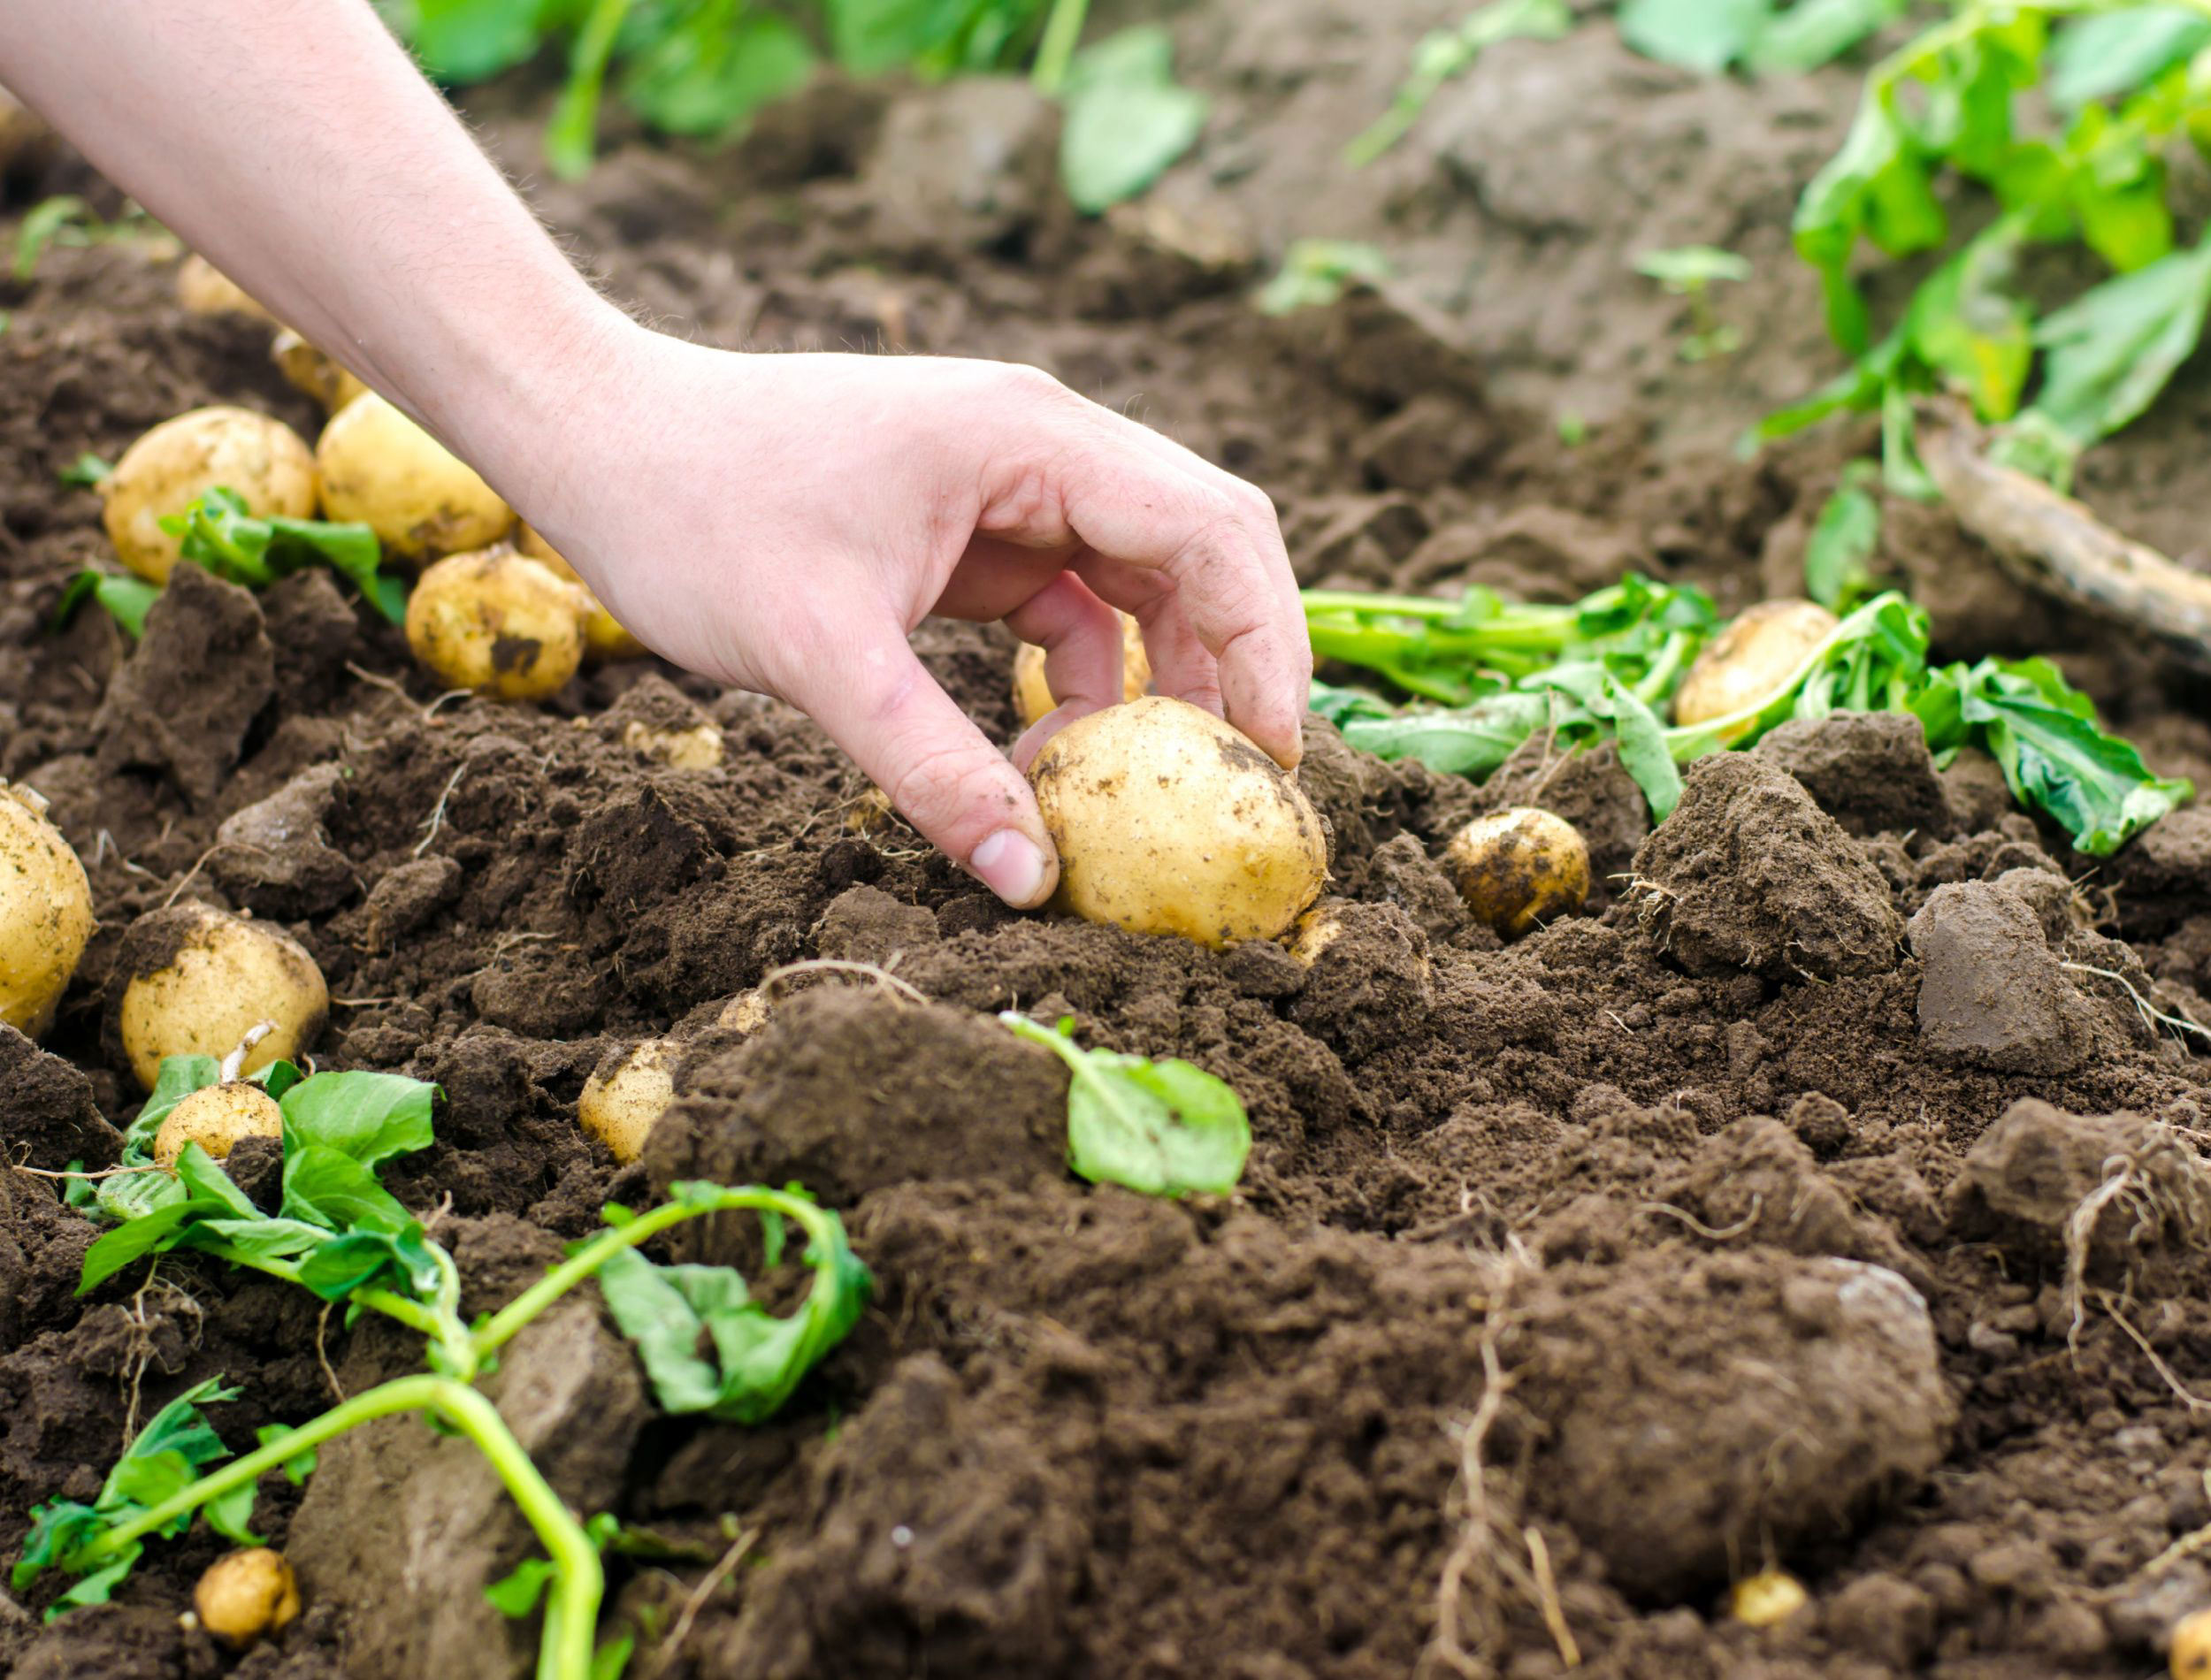 How to Use Coffee Grounds to Fertilize Your Potatoes